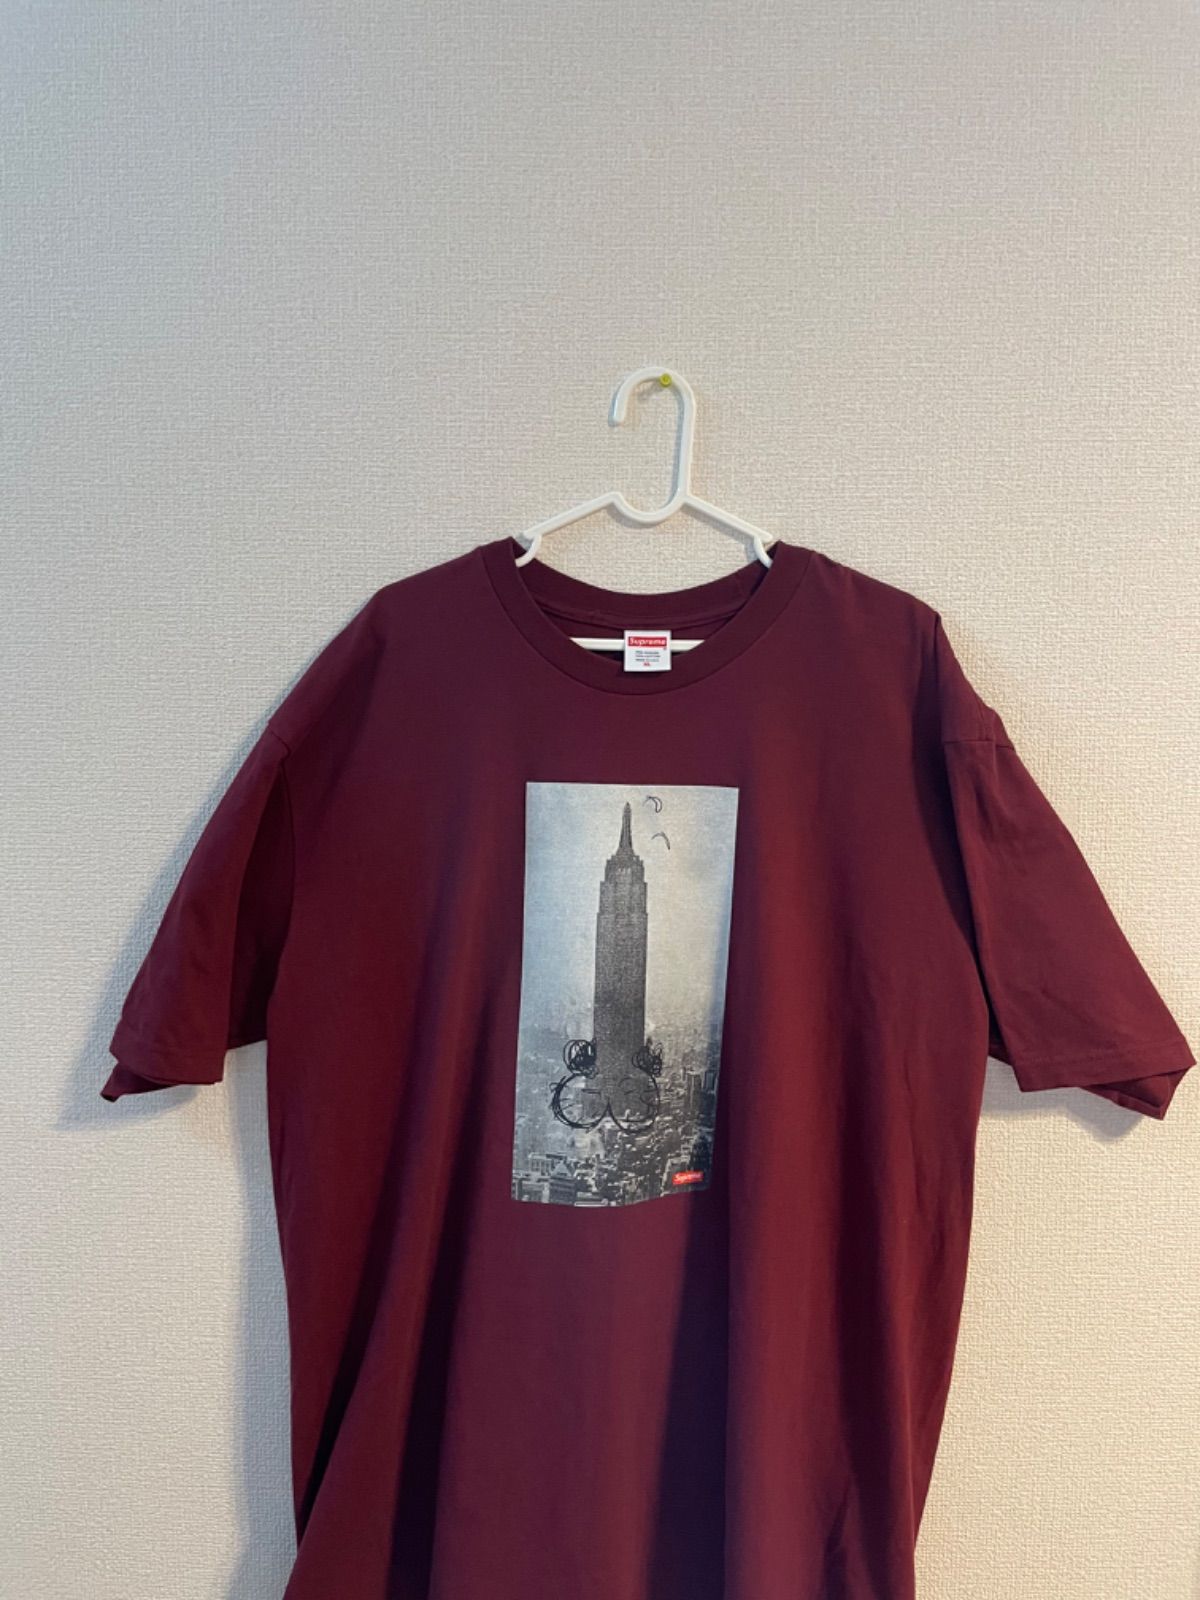 SUPREME Mike Kelley The Empire State Tee - ストリートファッション ...